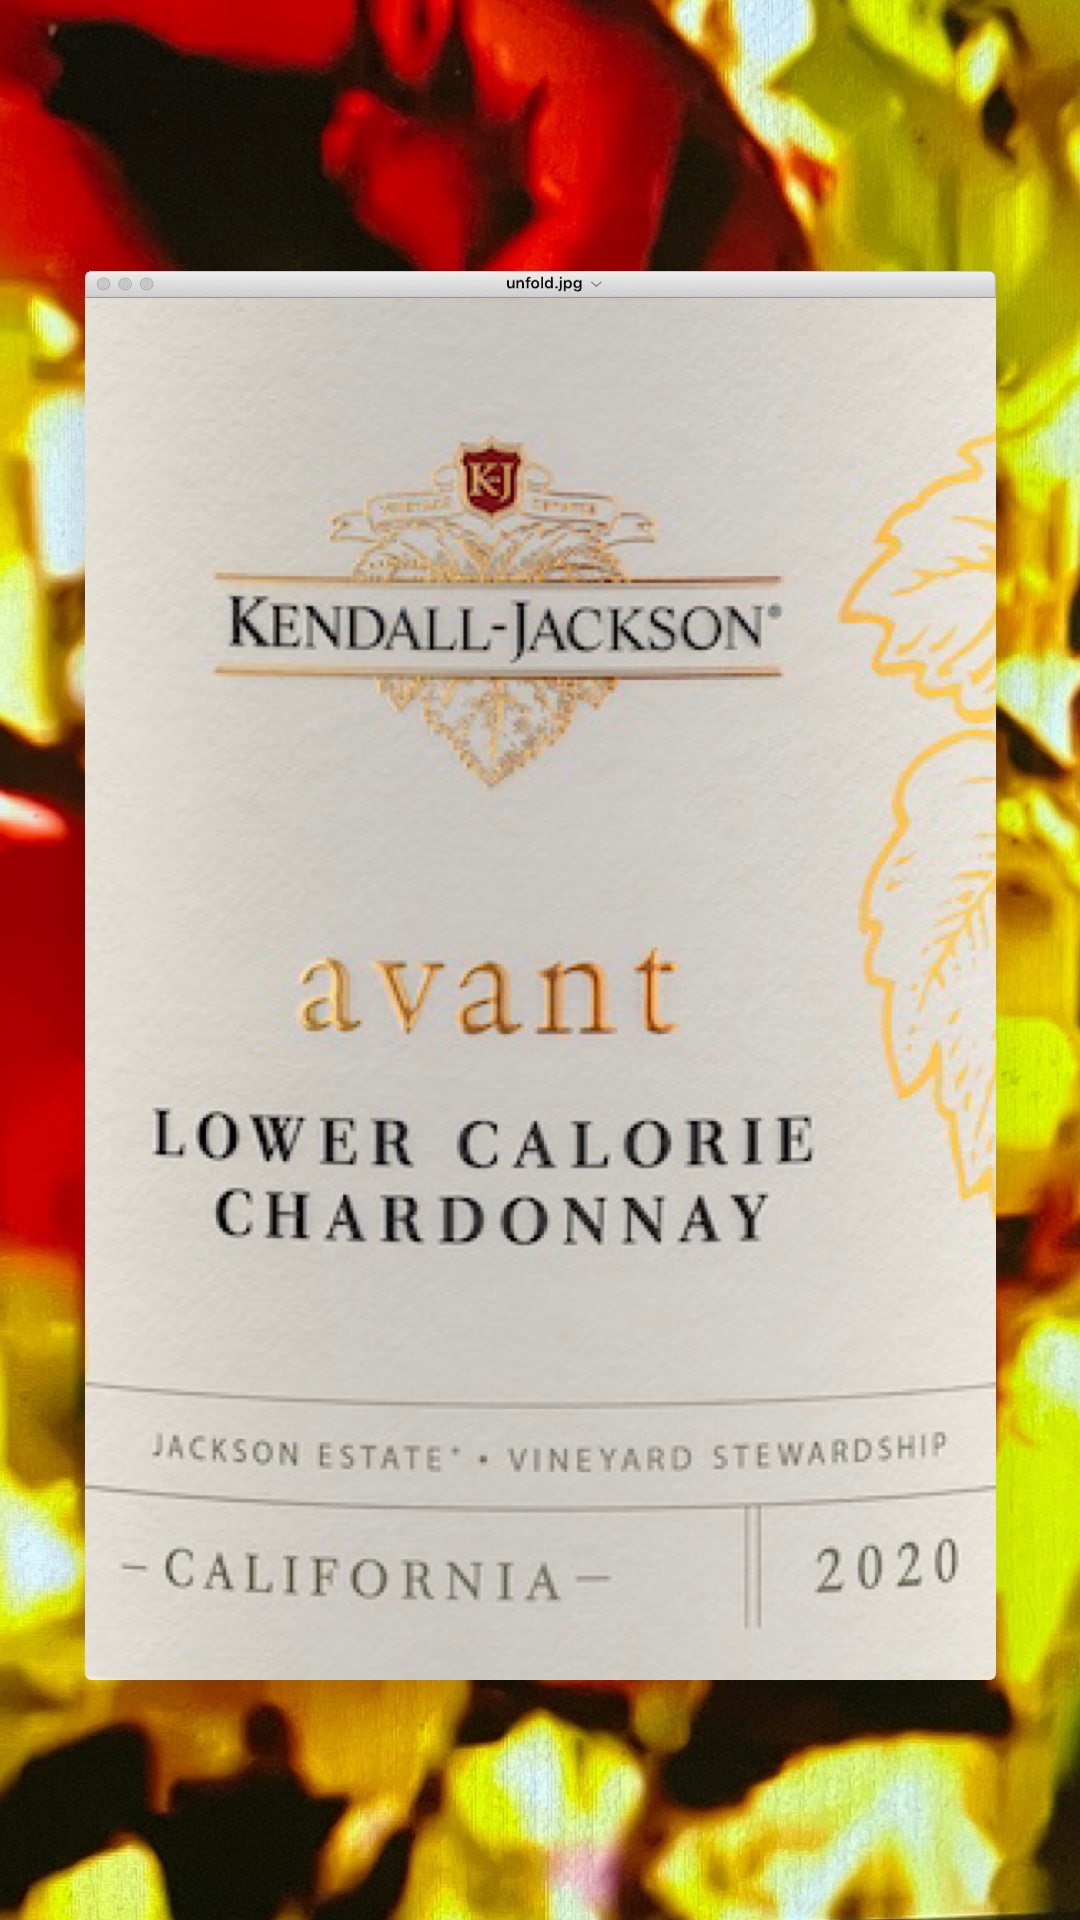 Just in time for summer – Kendall-Jackson launches a low-calorie chardonnay